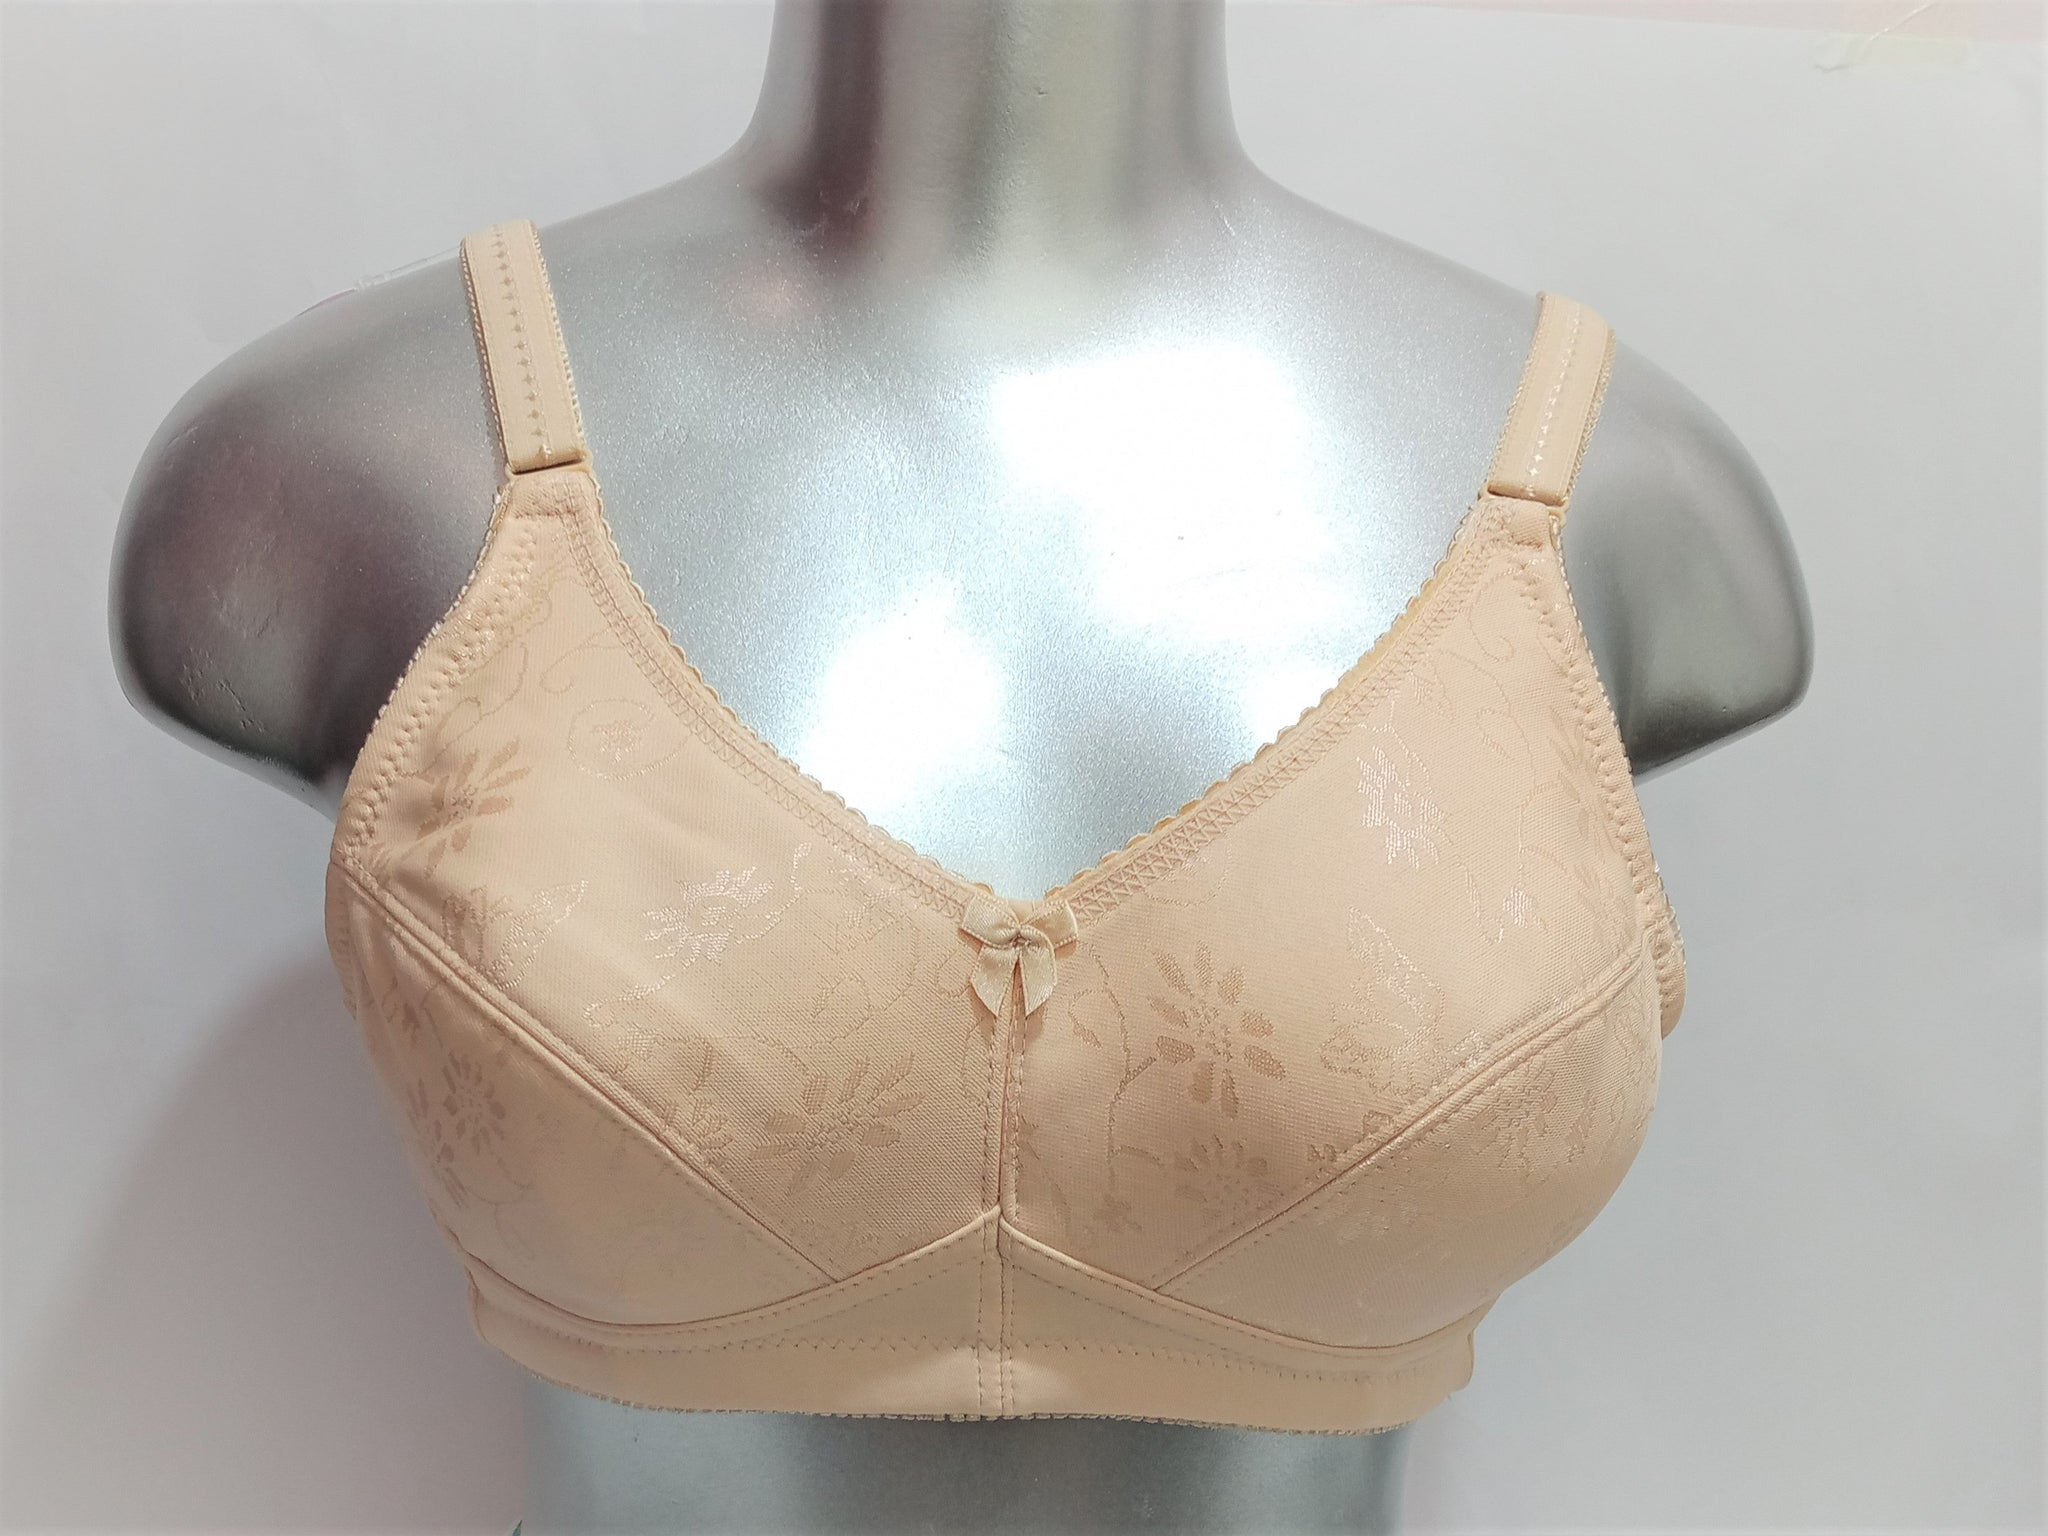 Can-Care Aura Mastectomy Bra (Special promotion)